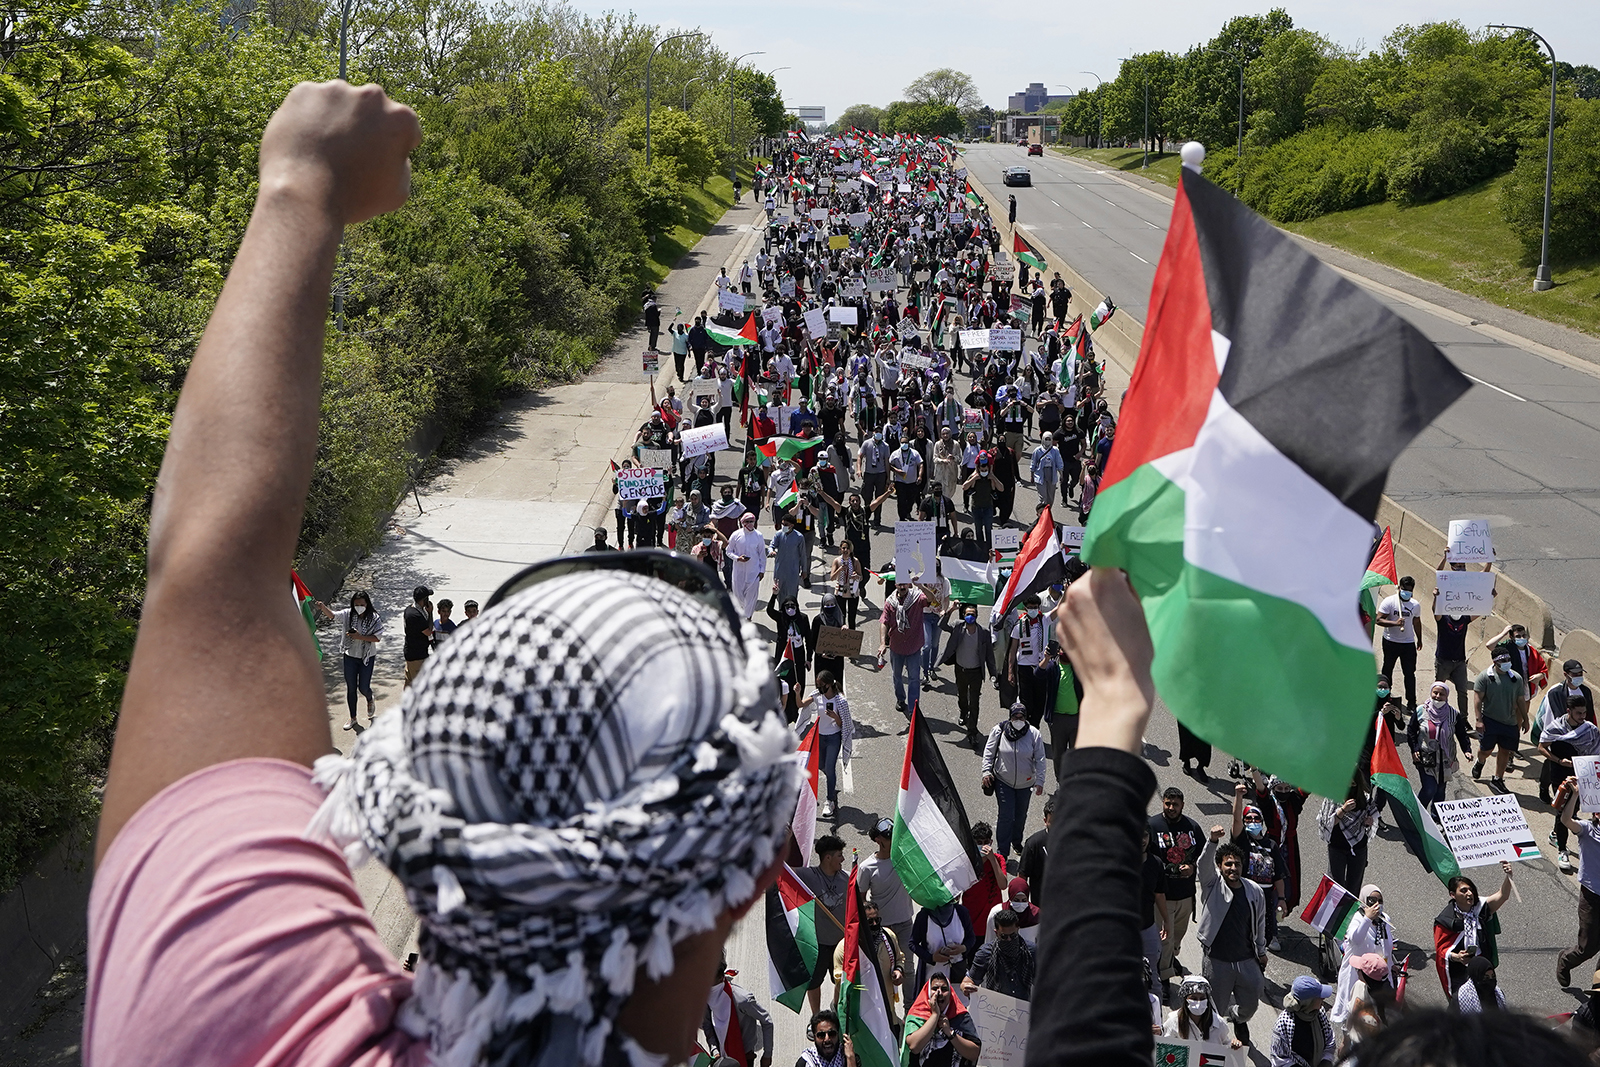 Protesters supporting Palestinians walk down Michigan Ave., as President Joe Biden visits a Ford electric vehicle center nearby, Tuesday, May 18, 2021, in Dearborn, Mich. Biden’s efforts to spotlight his big infrastructure plans are suddenly being overshadowed by the escalating violence between Israel and the Palestinians. (AP Photo/Carlos Osorio)